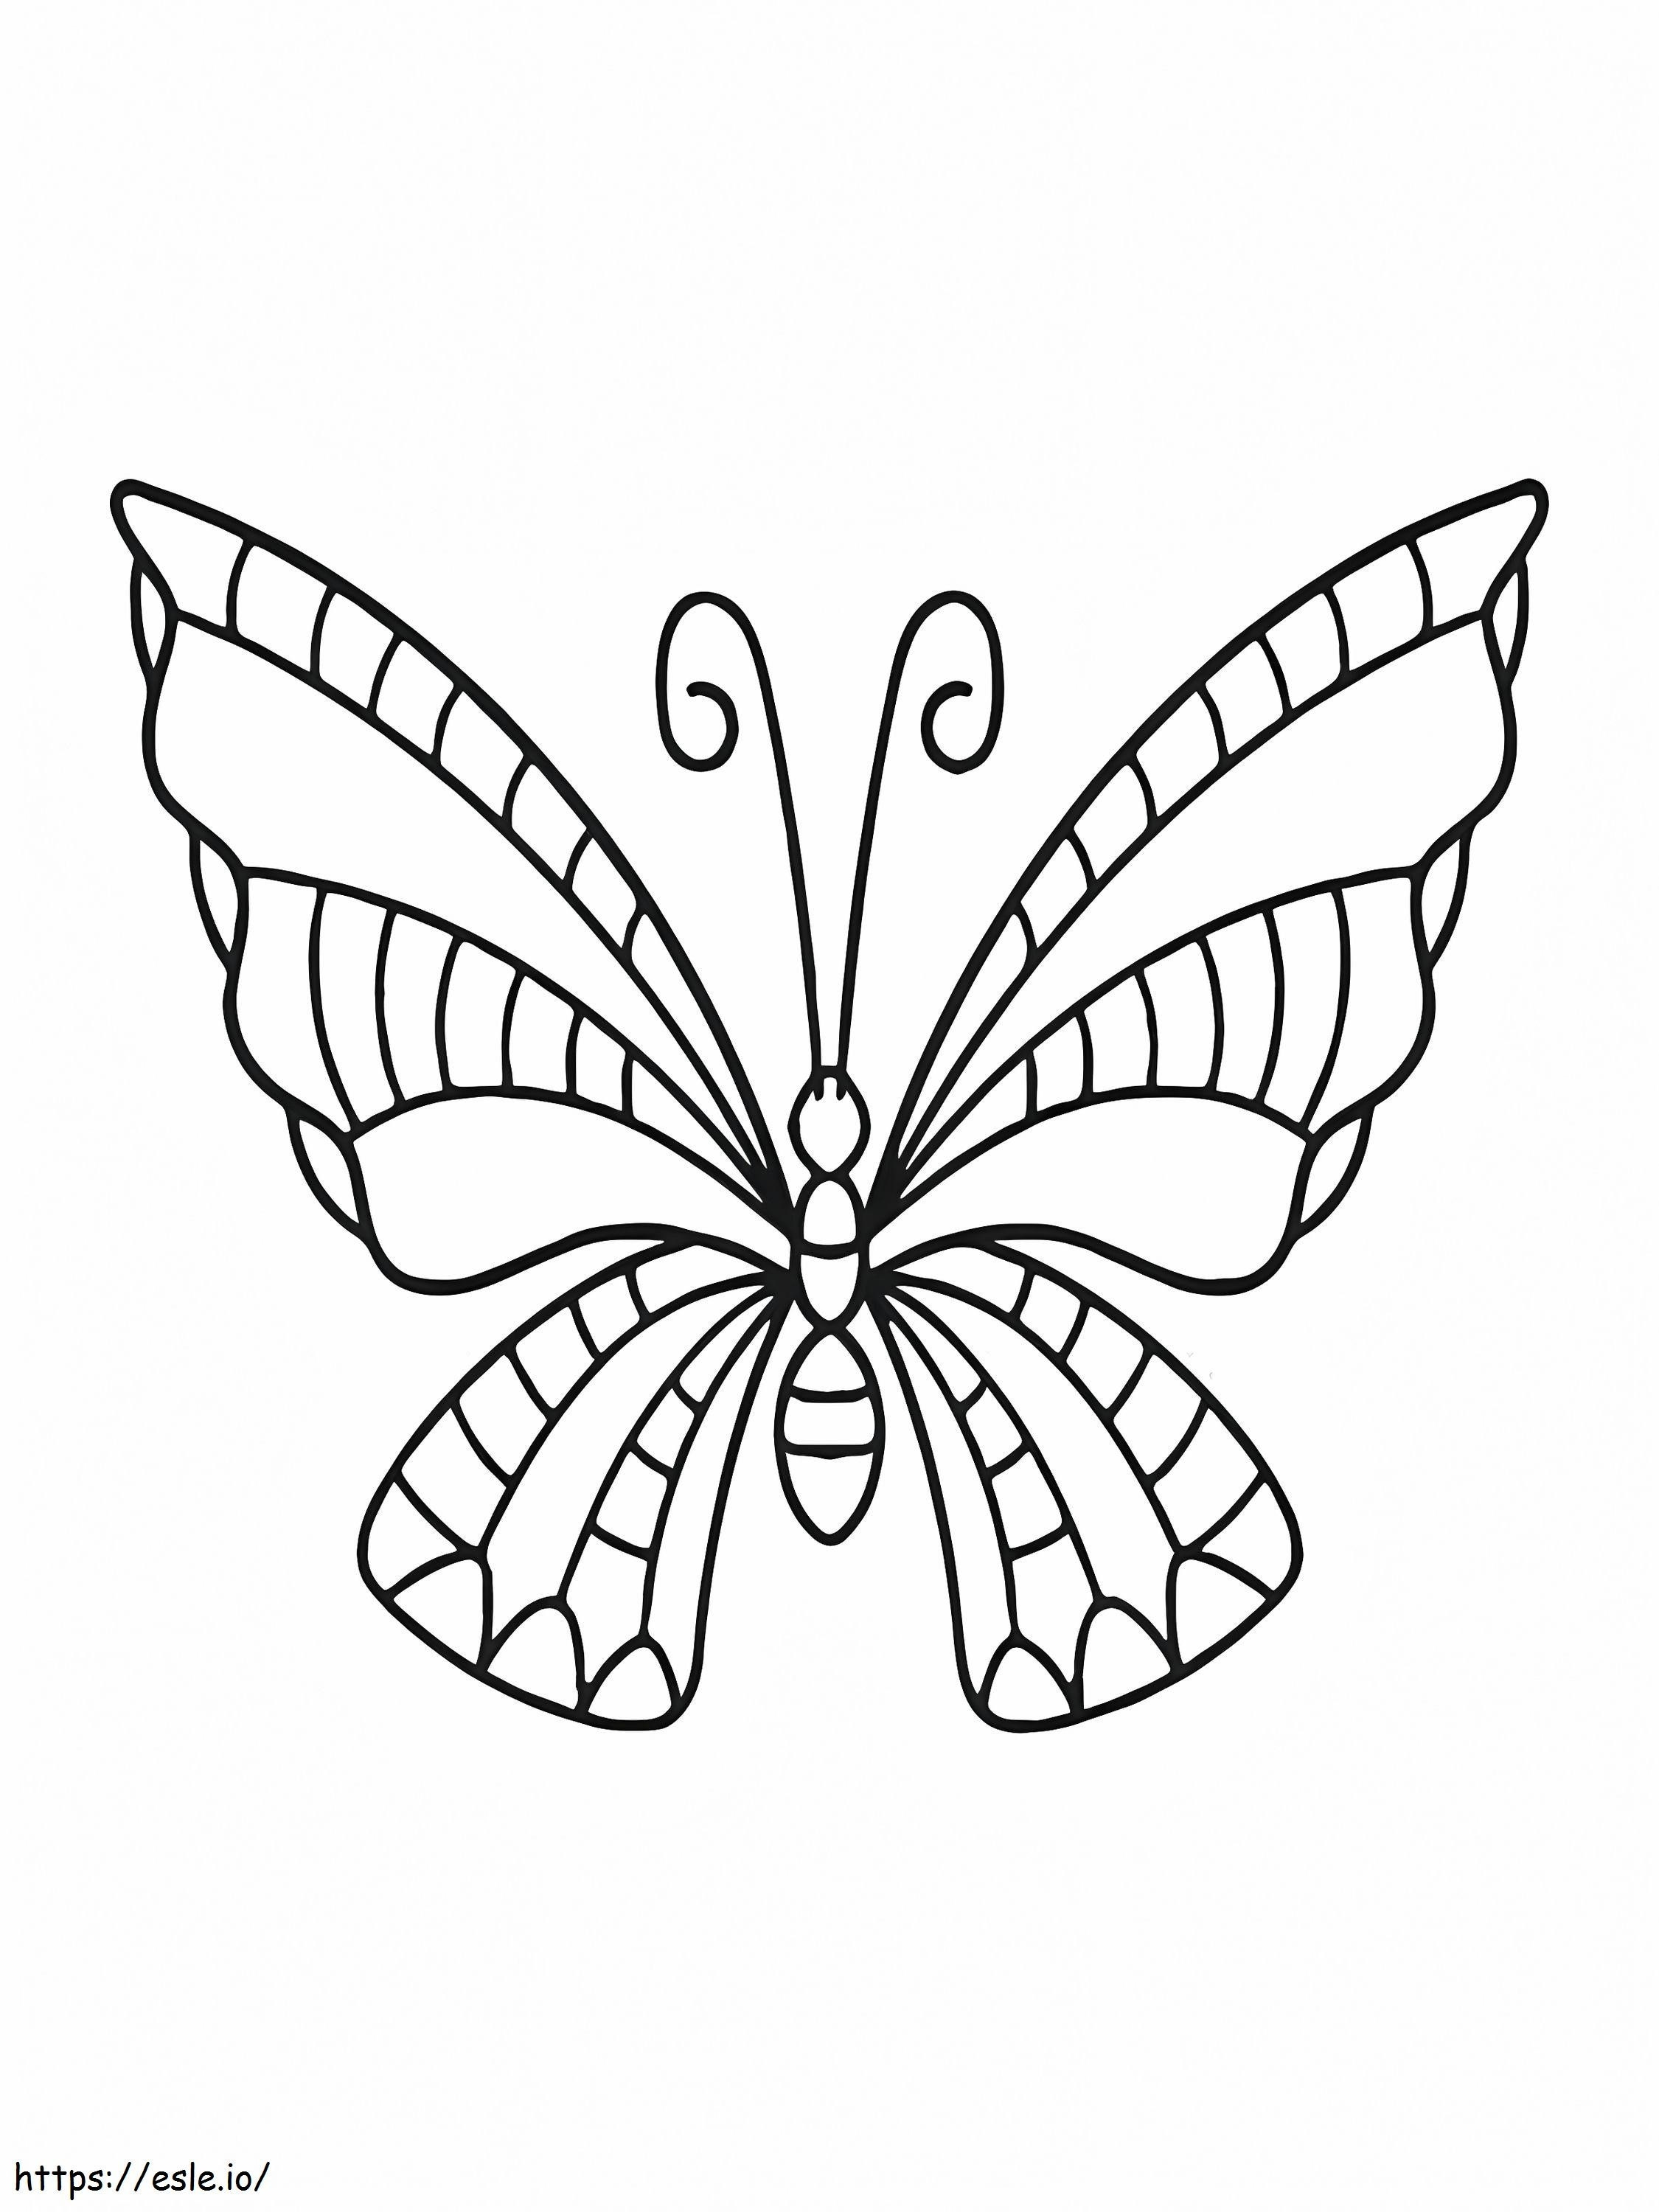 Simple Aesthetic Butterfly coloring page